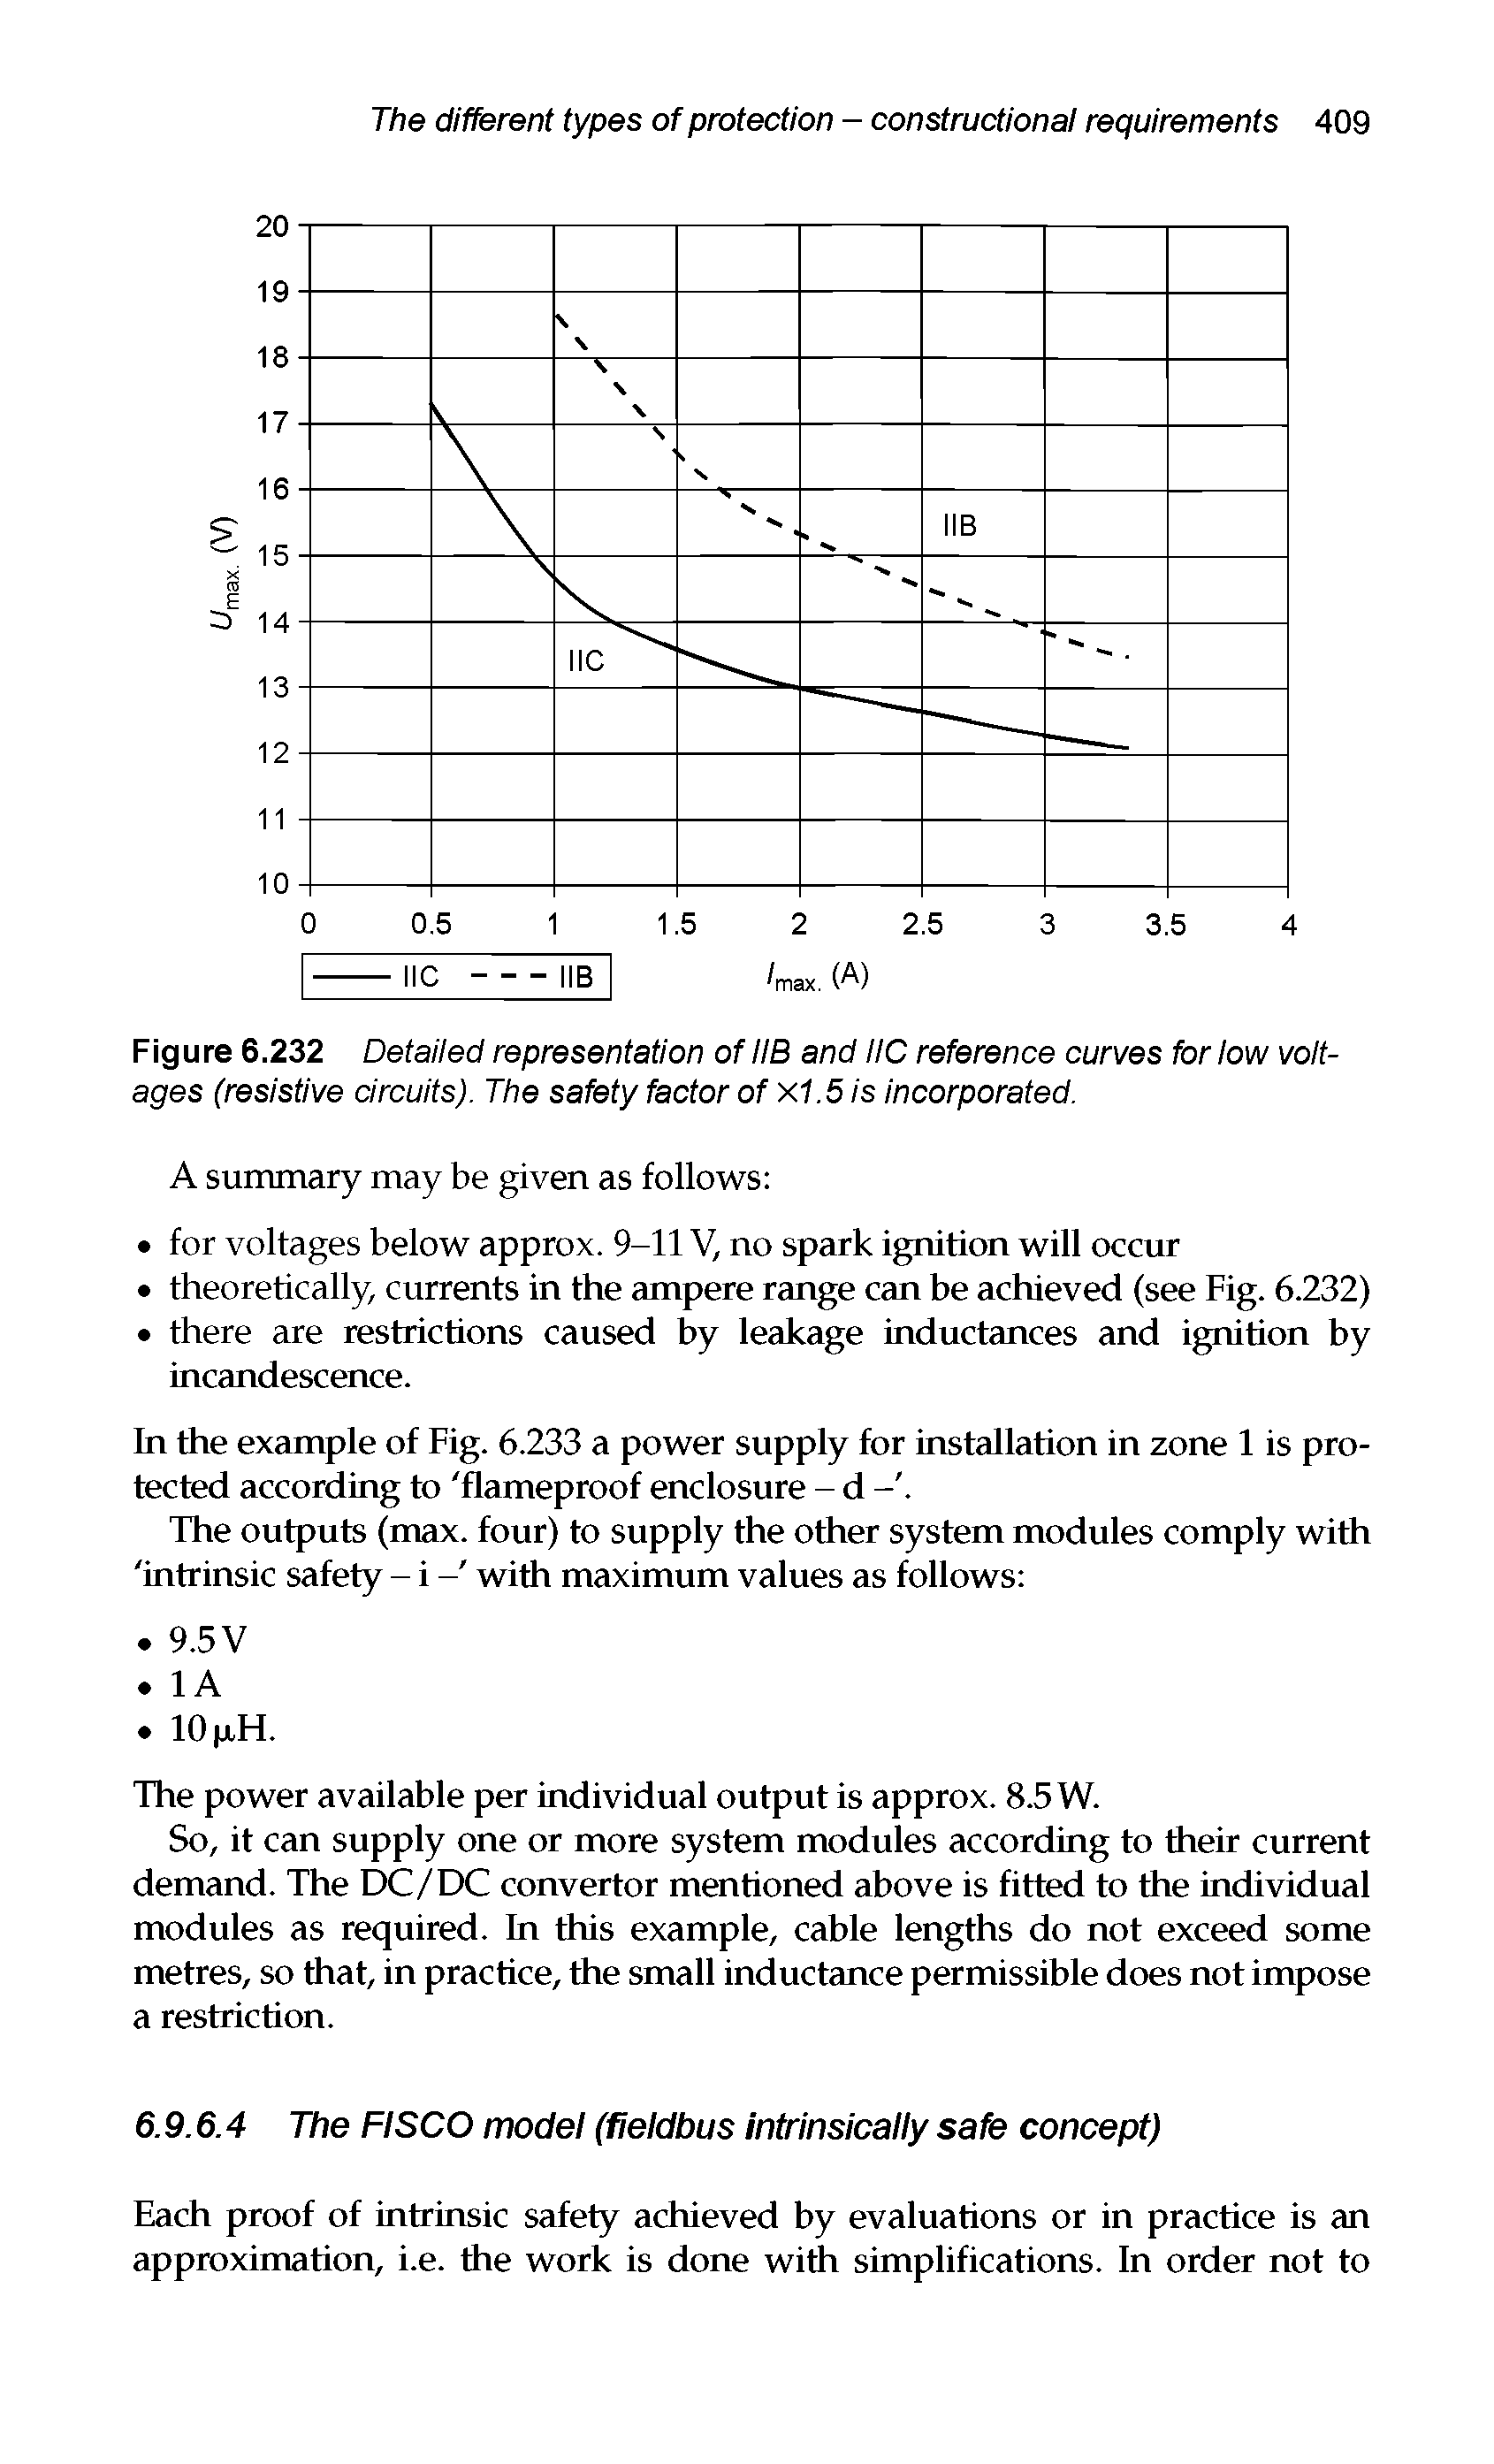 Figure 6.232 Detailed representation of IIB and IIC reference curves for low voltages (resistive circuits). The safety factor of X1.5 is incorporated.